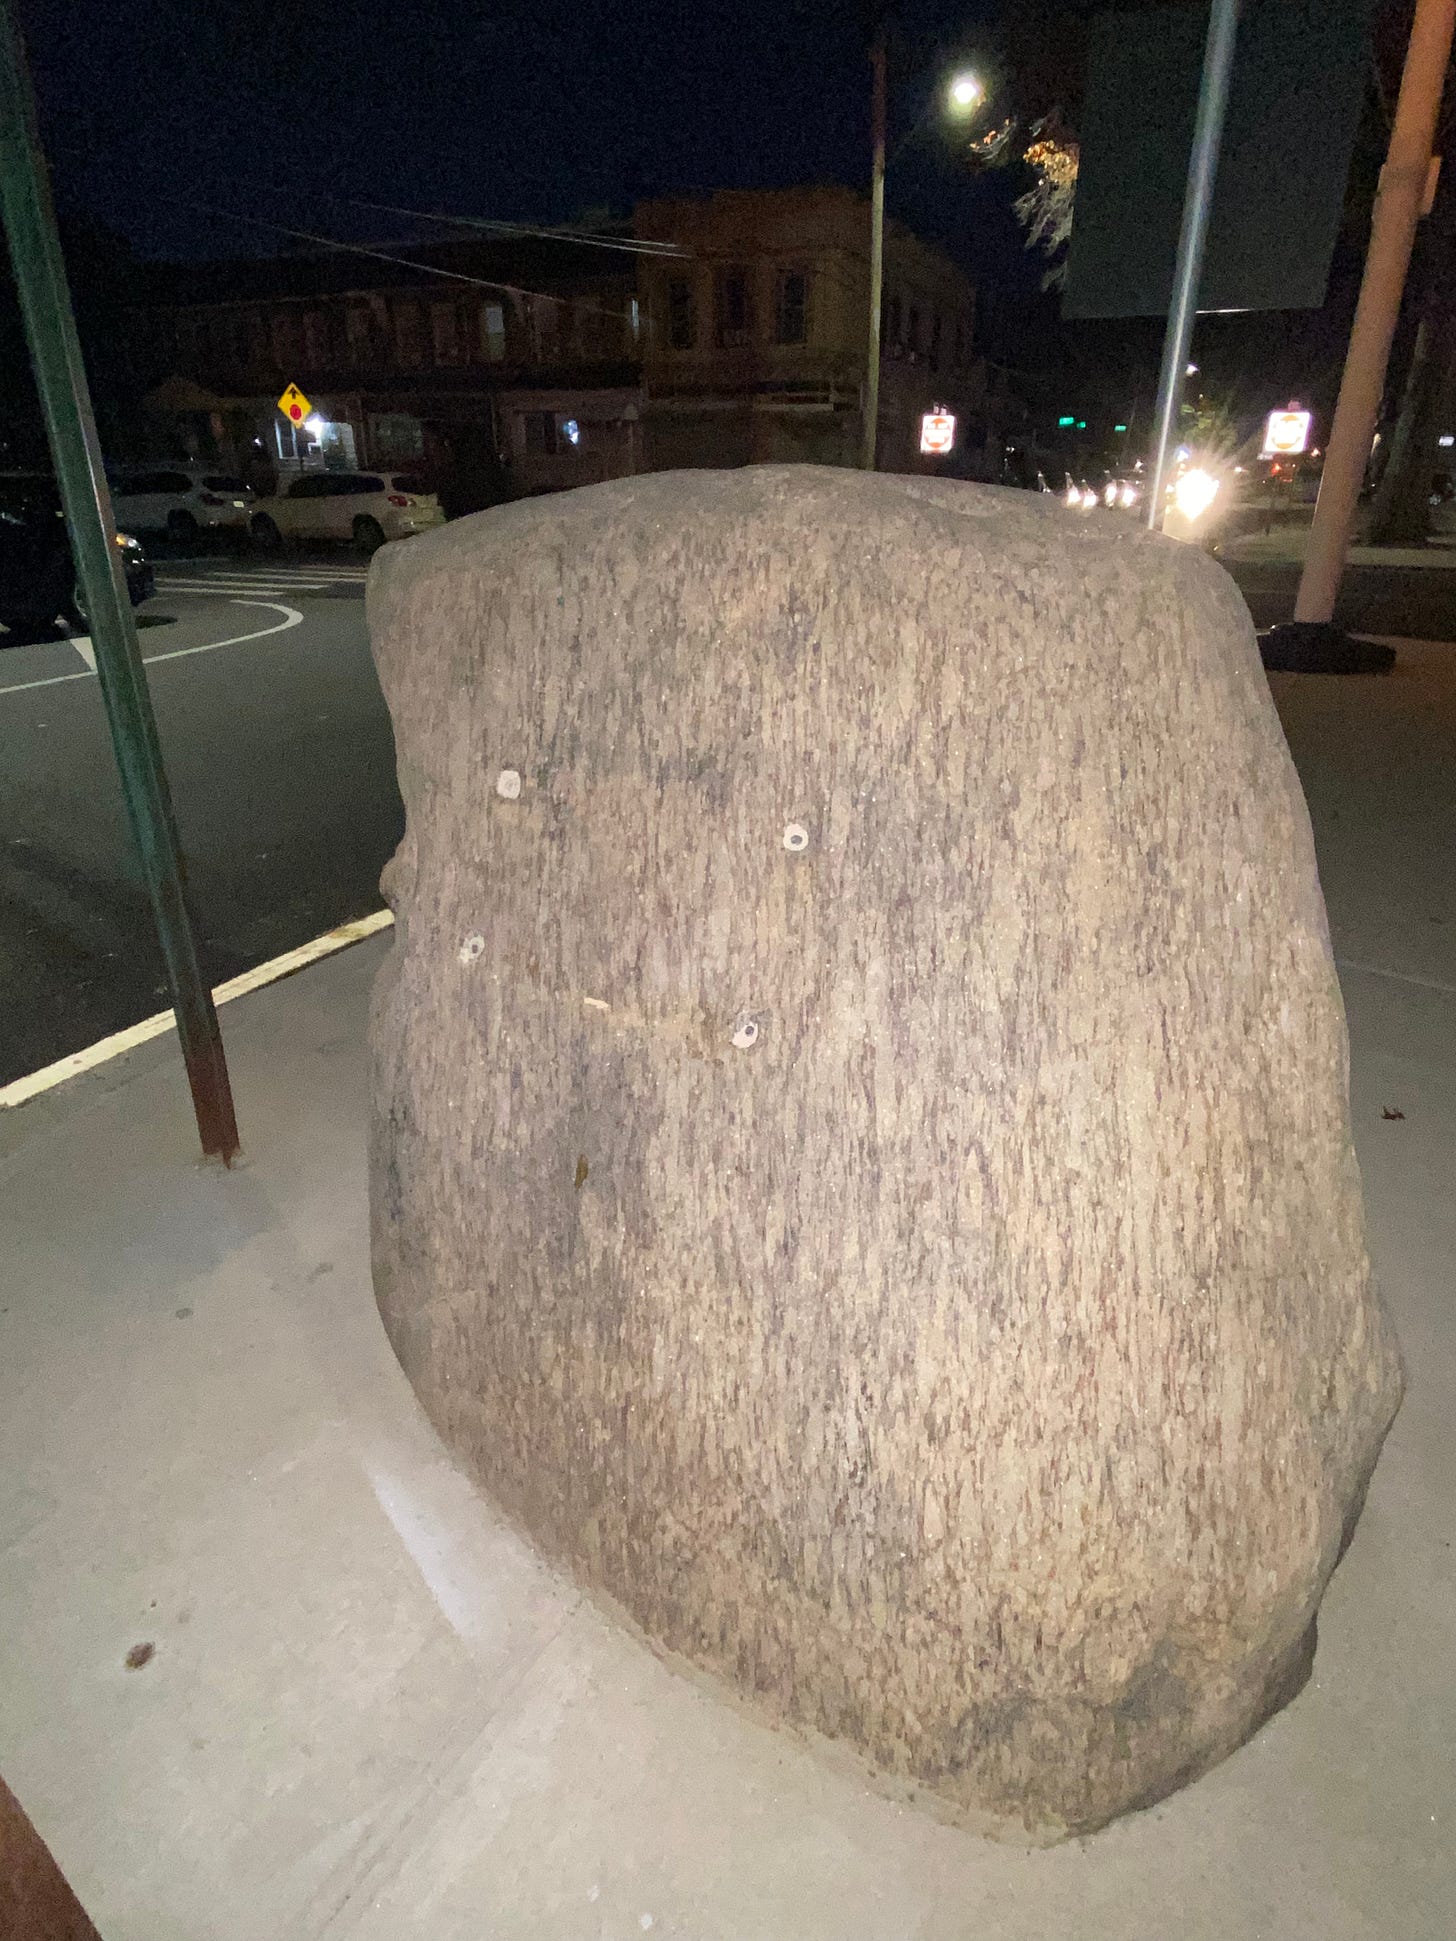 Image is a photograph of "the rock" of Whiting Square, illuminated by flash photography at night.